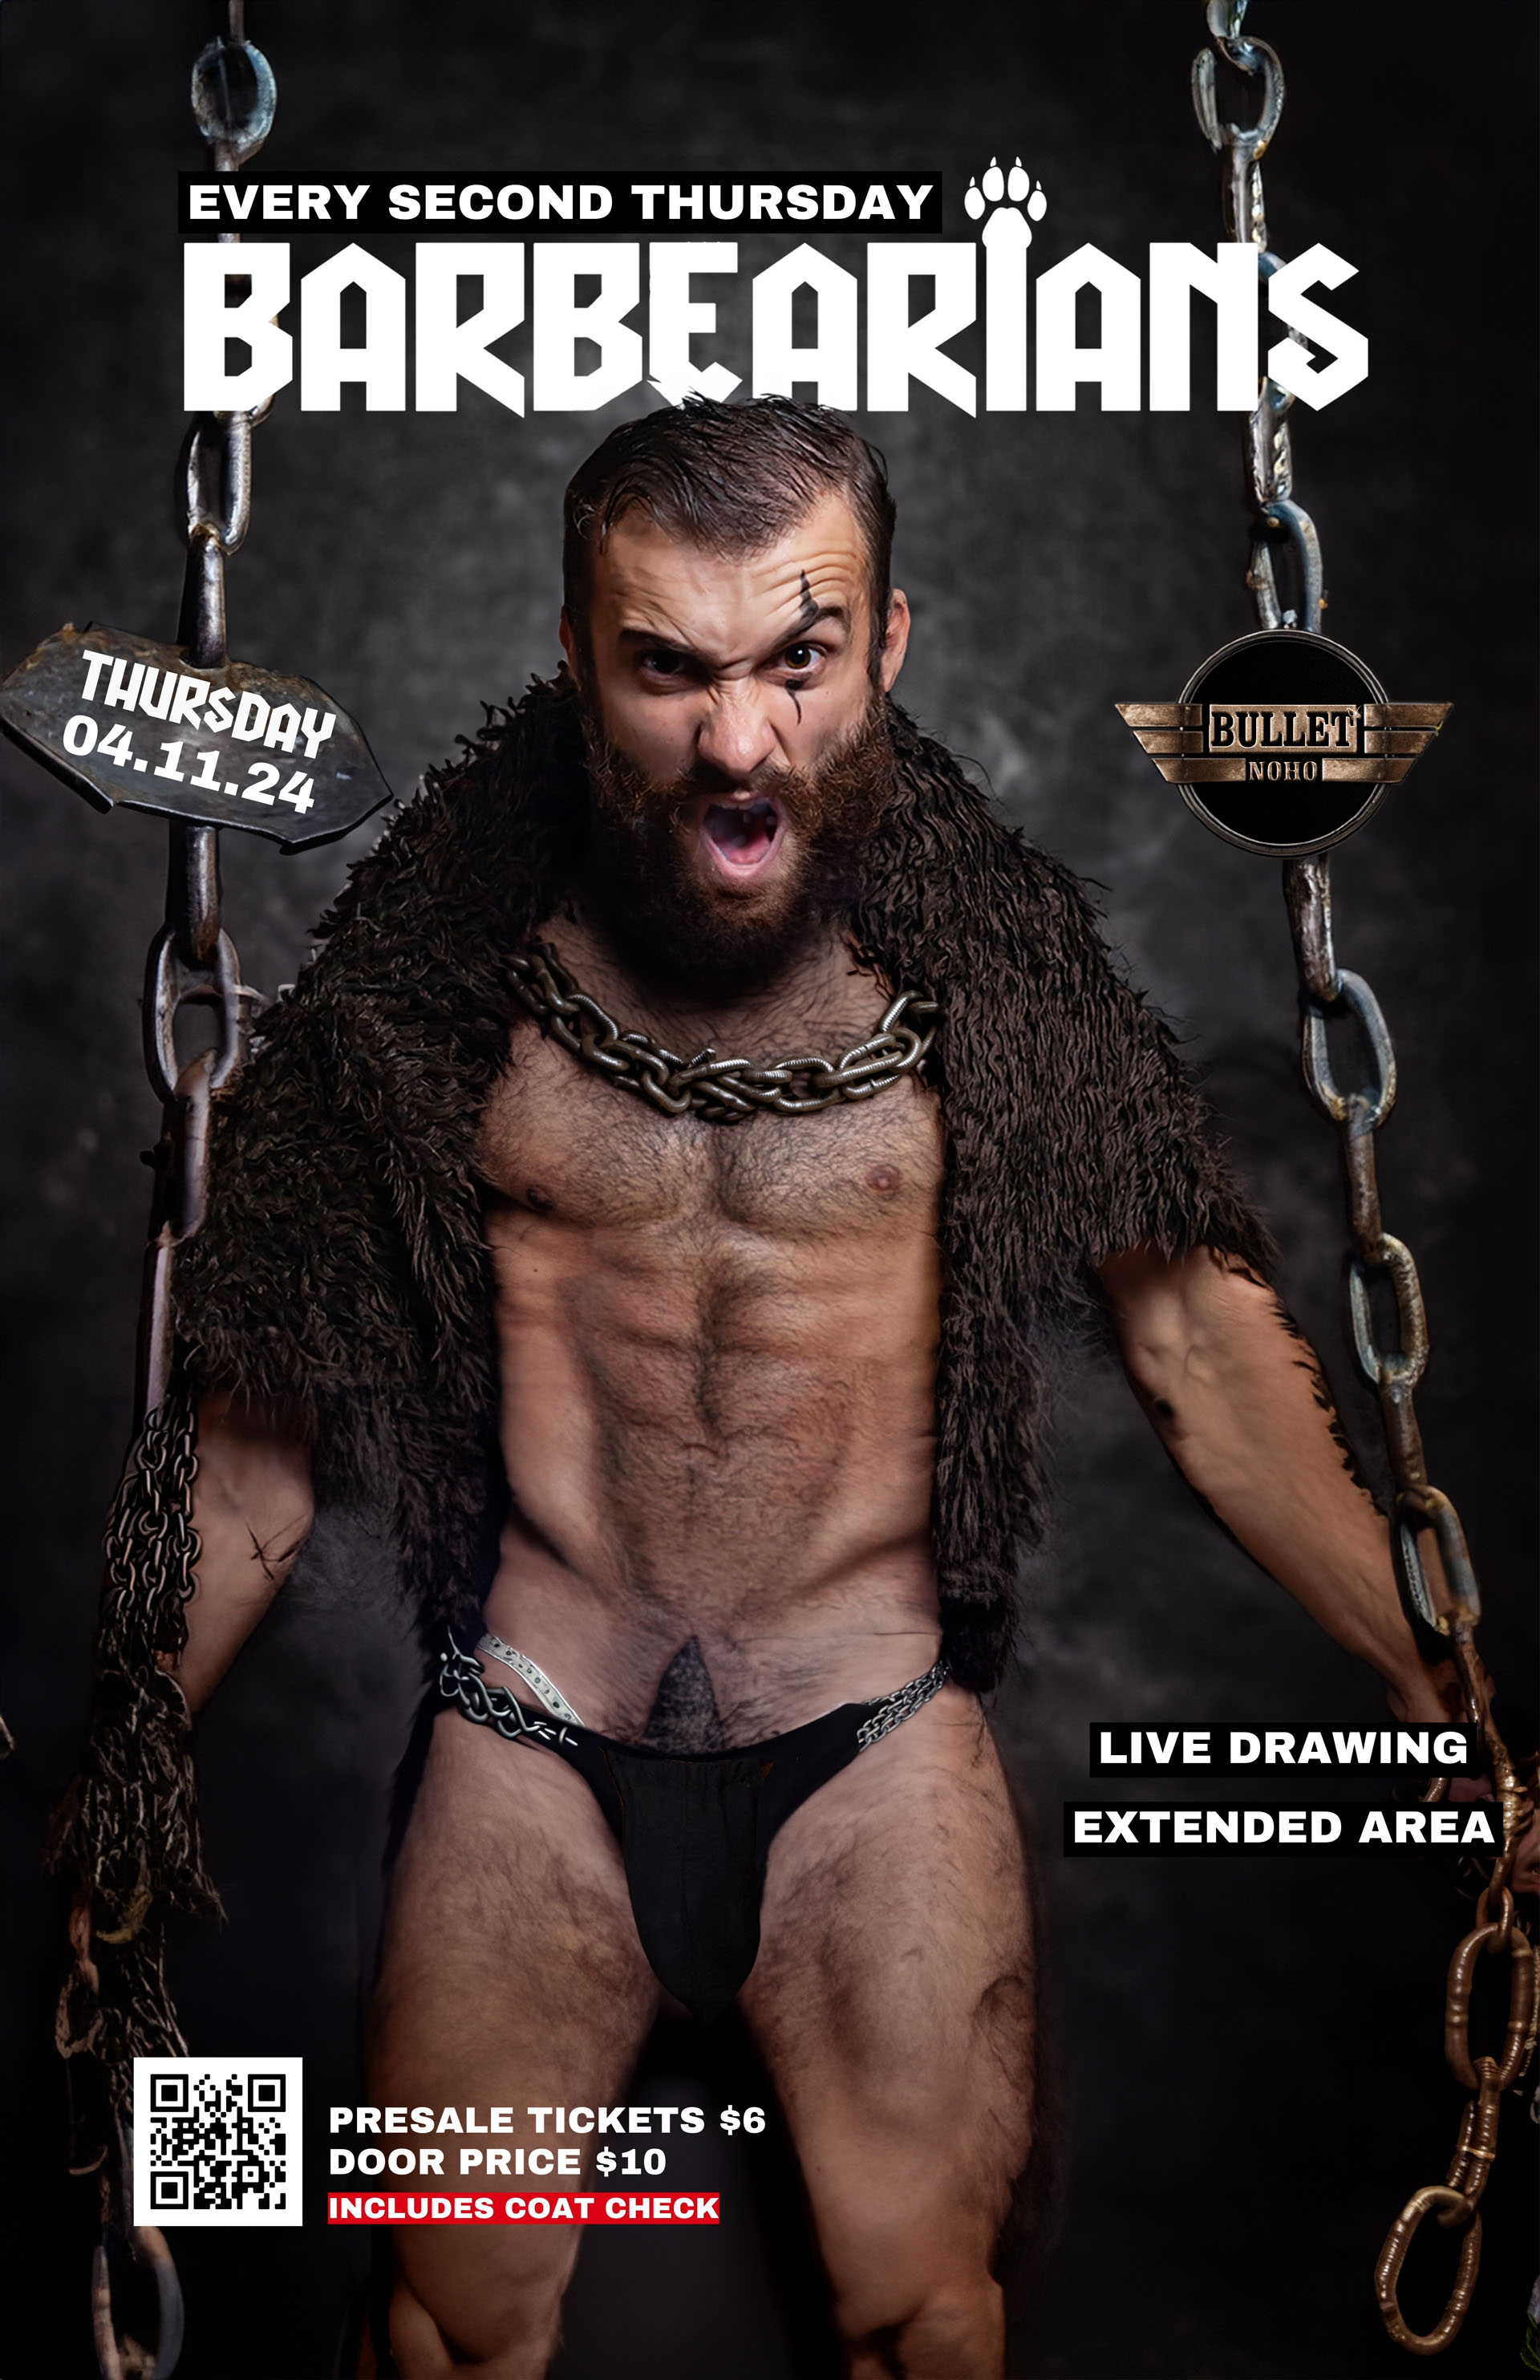 THE BULLET BAR Presents BARBEARIANS, A Bear & Leather Event: Thursday, 04/11/24 at 9:00 PM. Presale Tickets $6 and Door Cover $10. Presales: https://www.eventbrite.com/e/barbearians-the-bullet-noho-tickets-861353721167